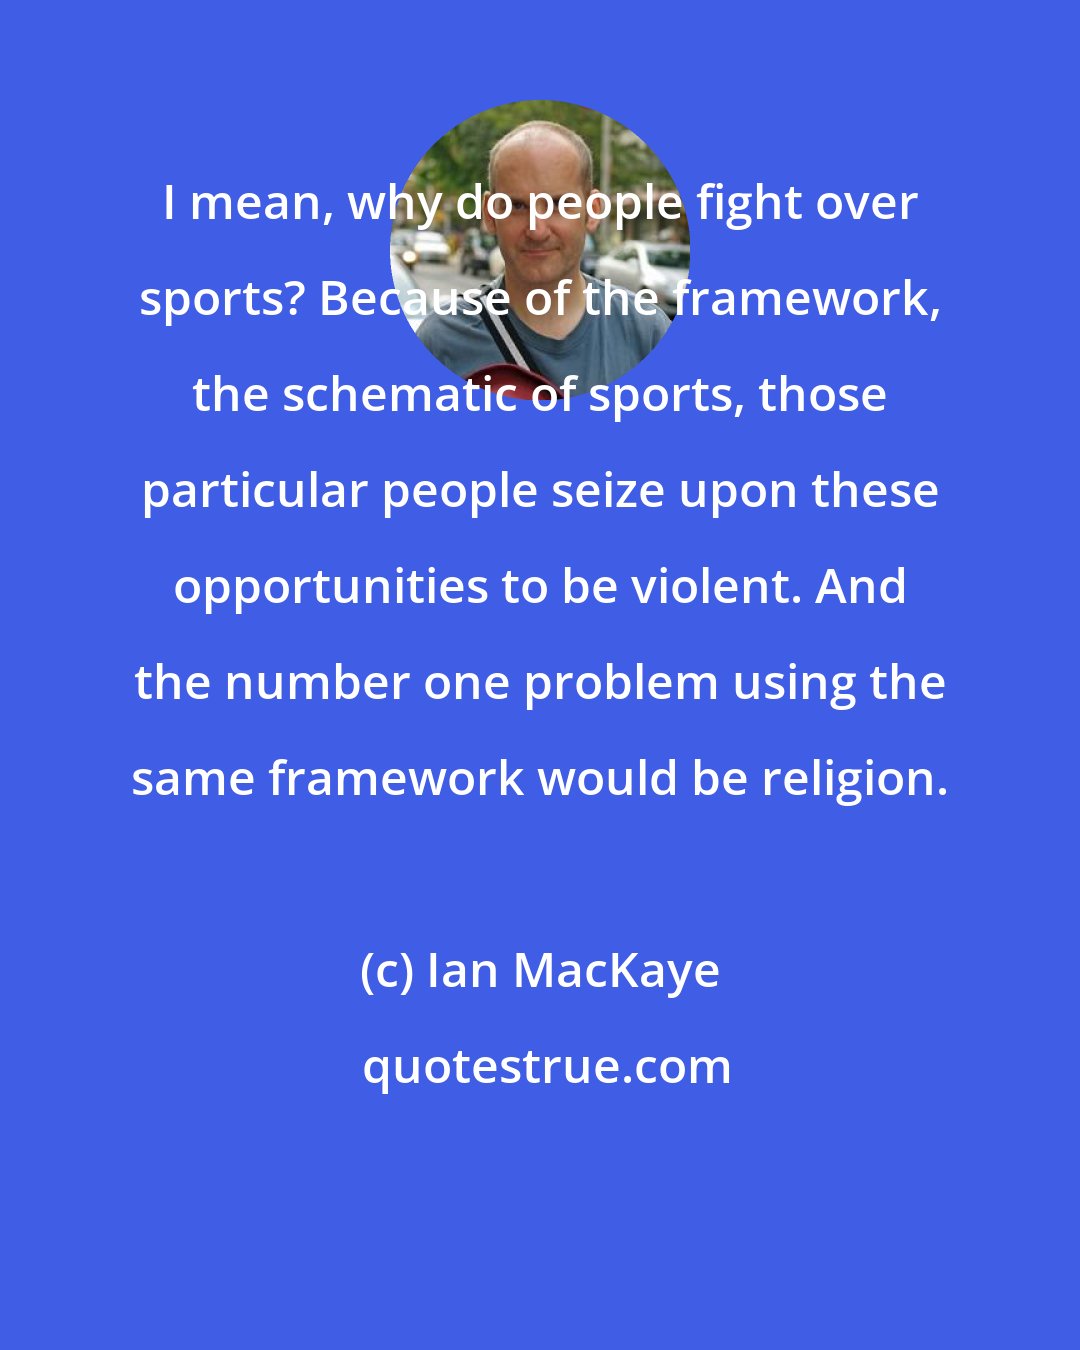 Ian MacKaye: I mean, why do people fight over sports? Because of the framework, the schematic of sports, those particular people seize upon these opportunities to be violent. And the number one problem using the same framework would be religion.